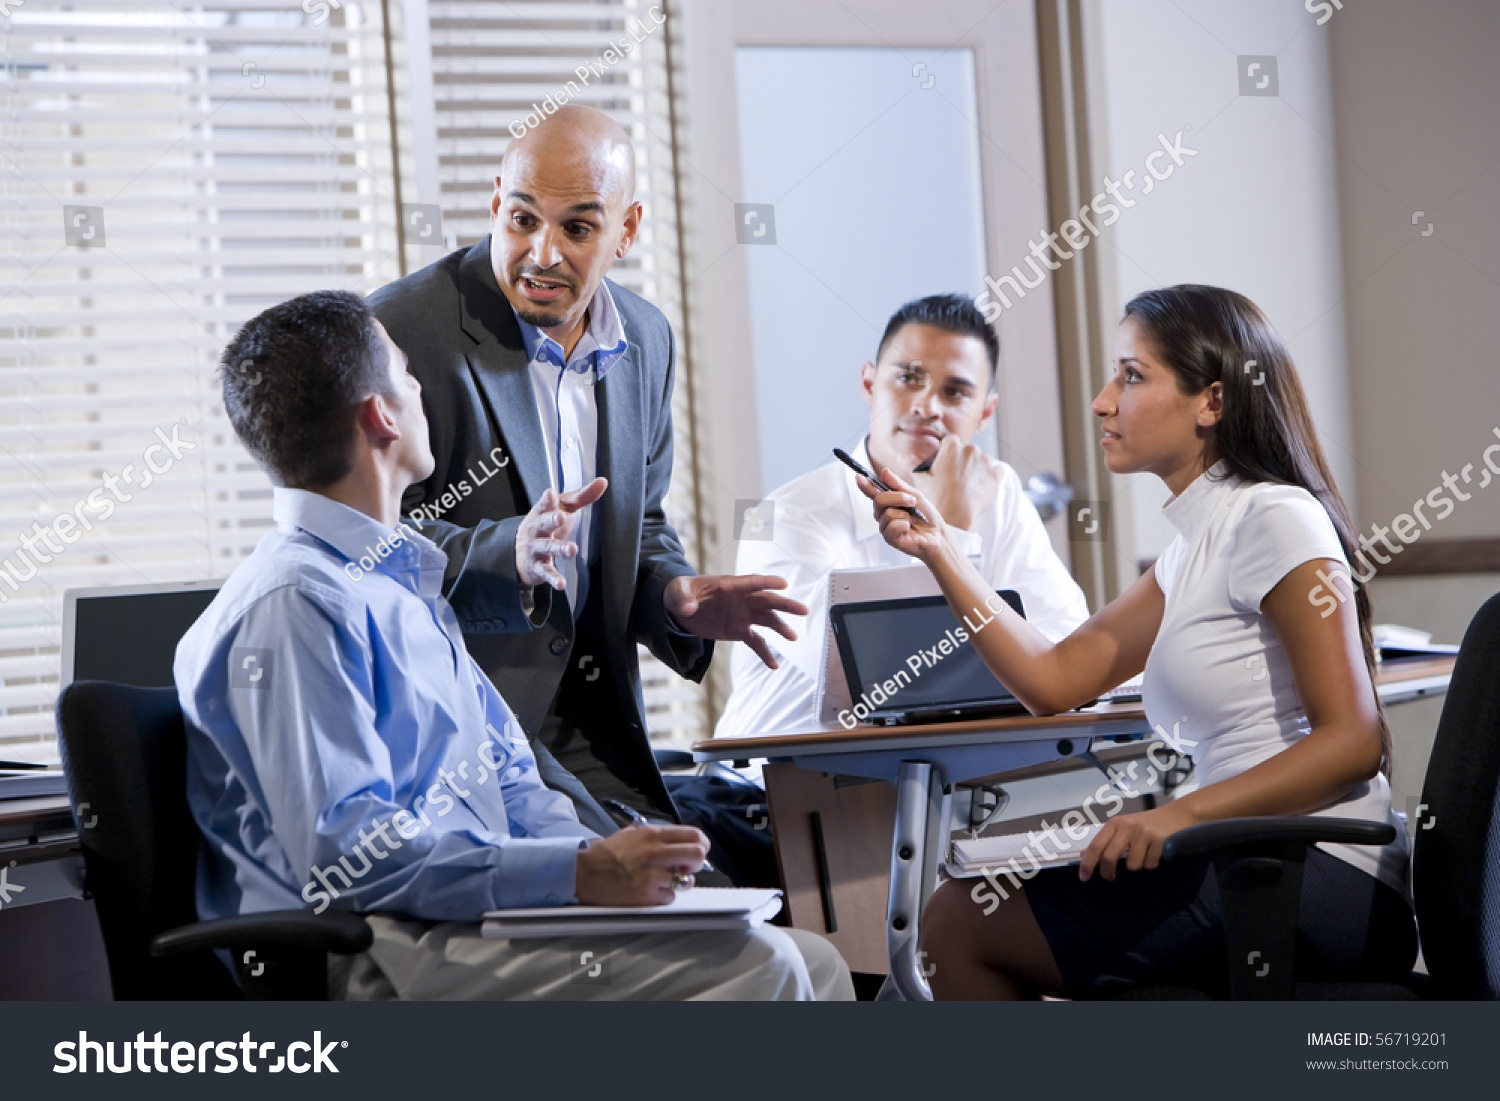 Image result for IMAGE OF A WORKER MEETING NEW WORKER IN THE OFFICE